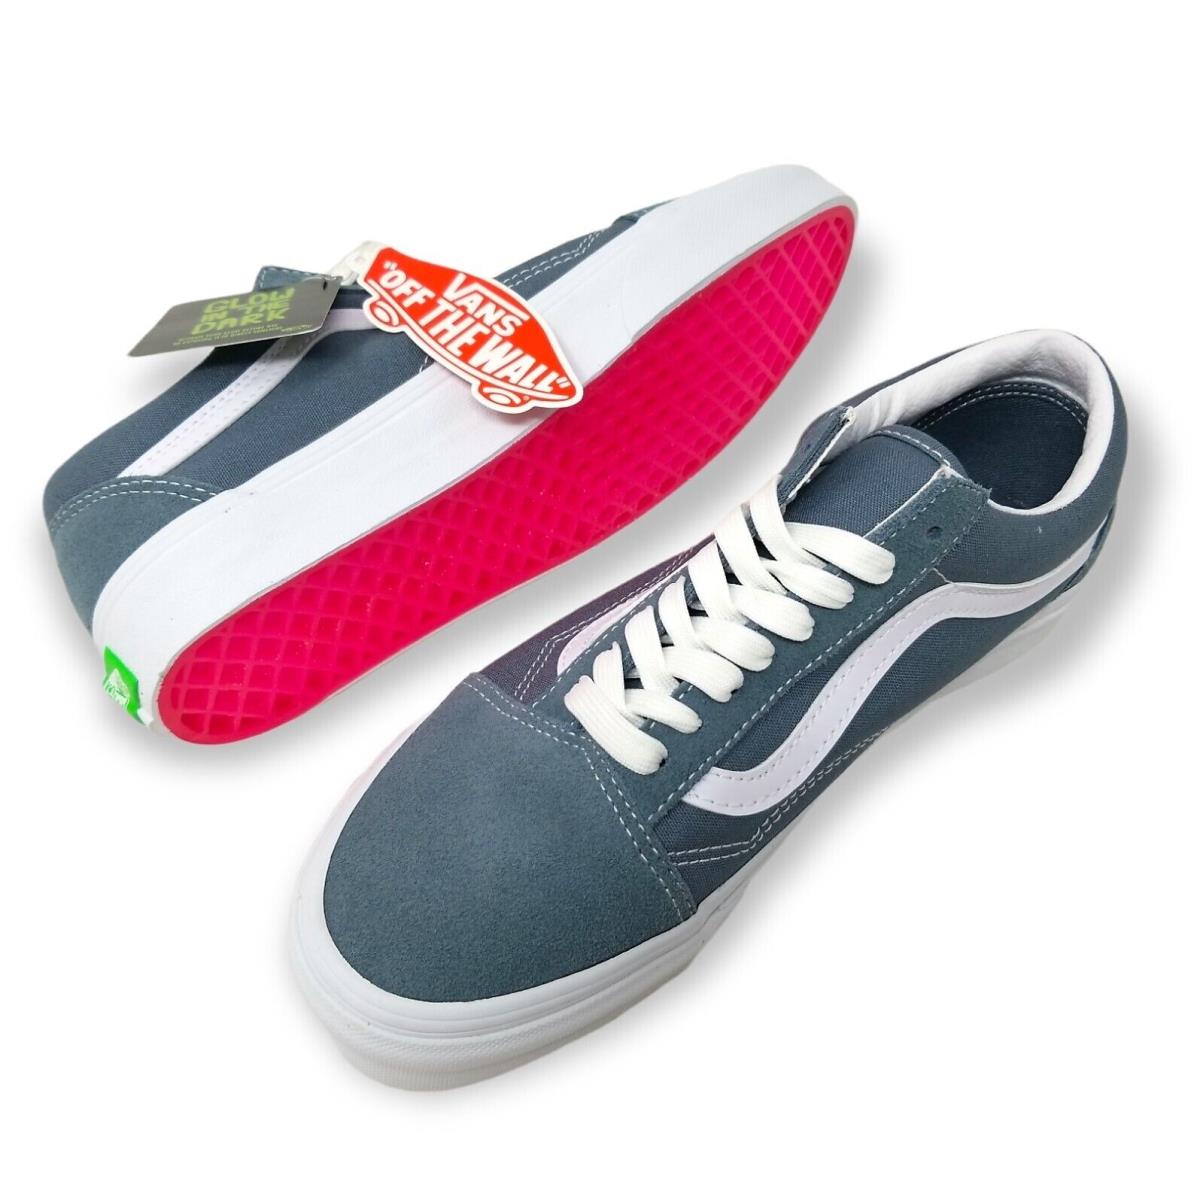 Vans - Mens / Womens - Old Skool - Glow Outsole - Stormy Weather